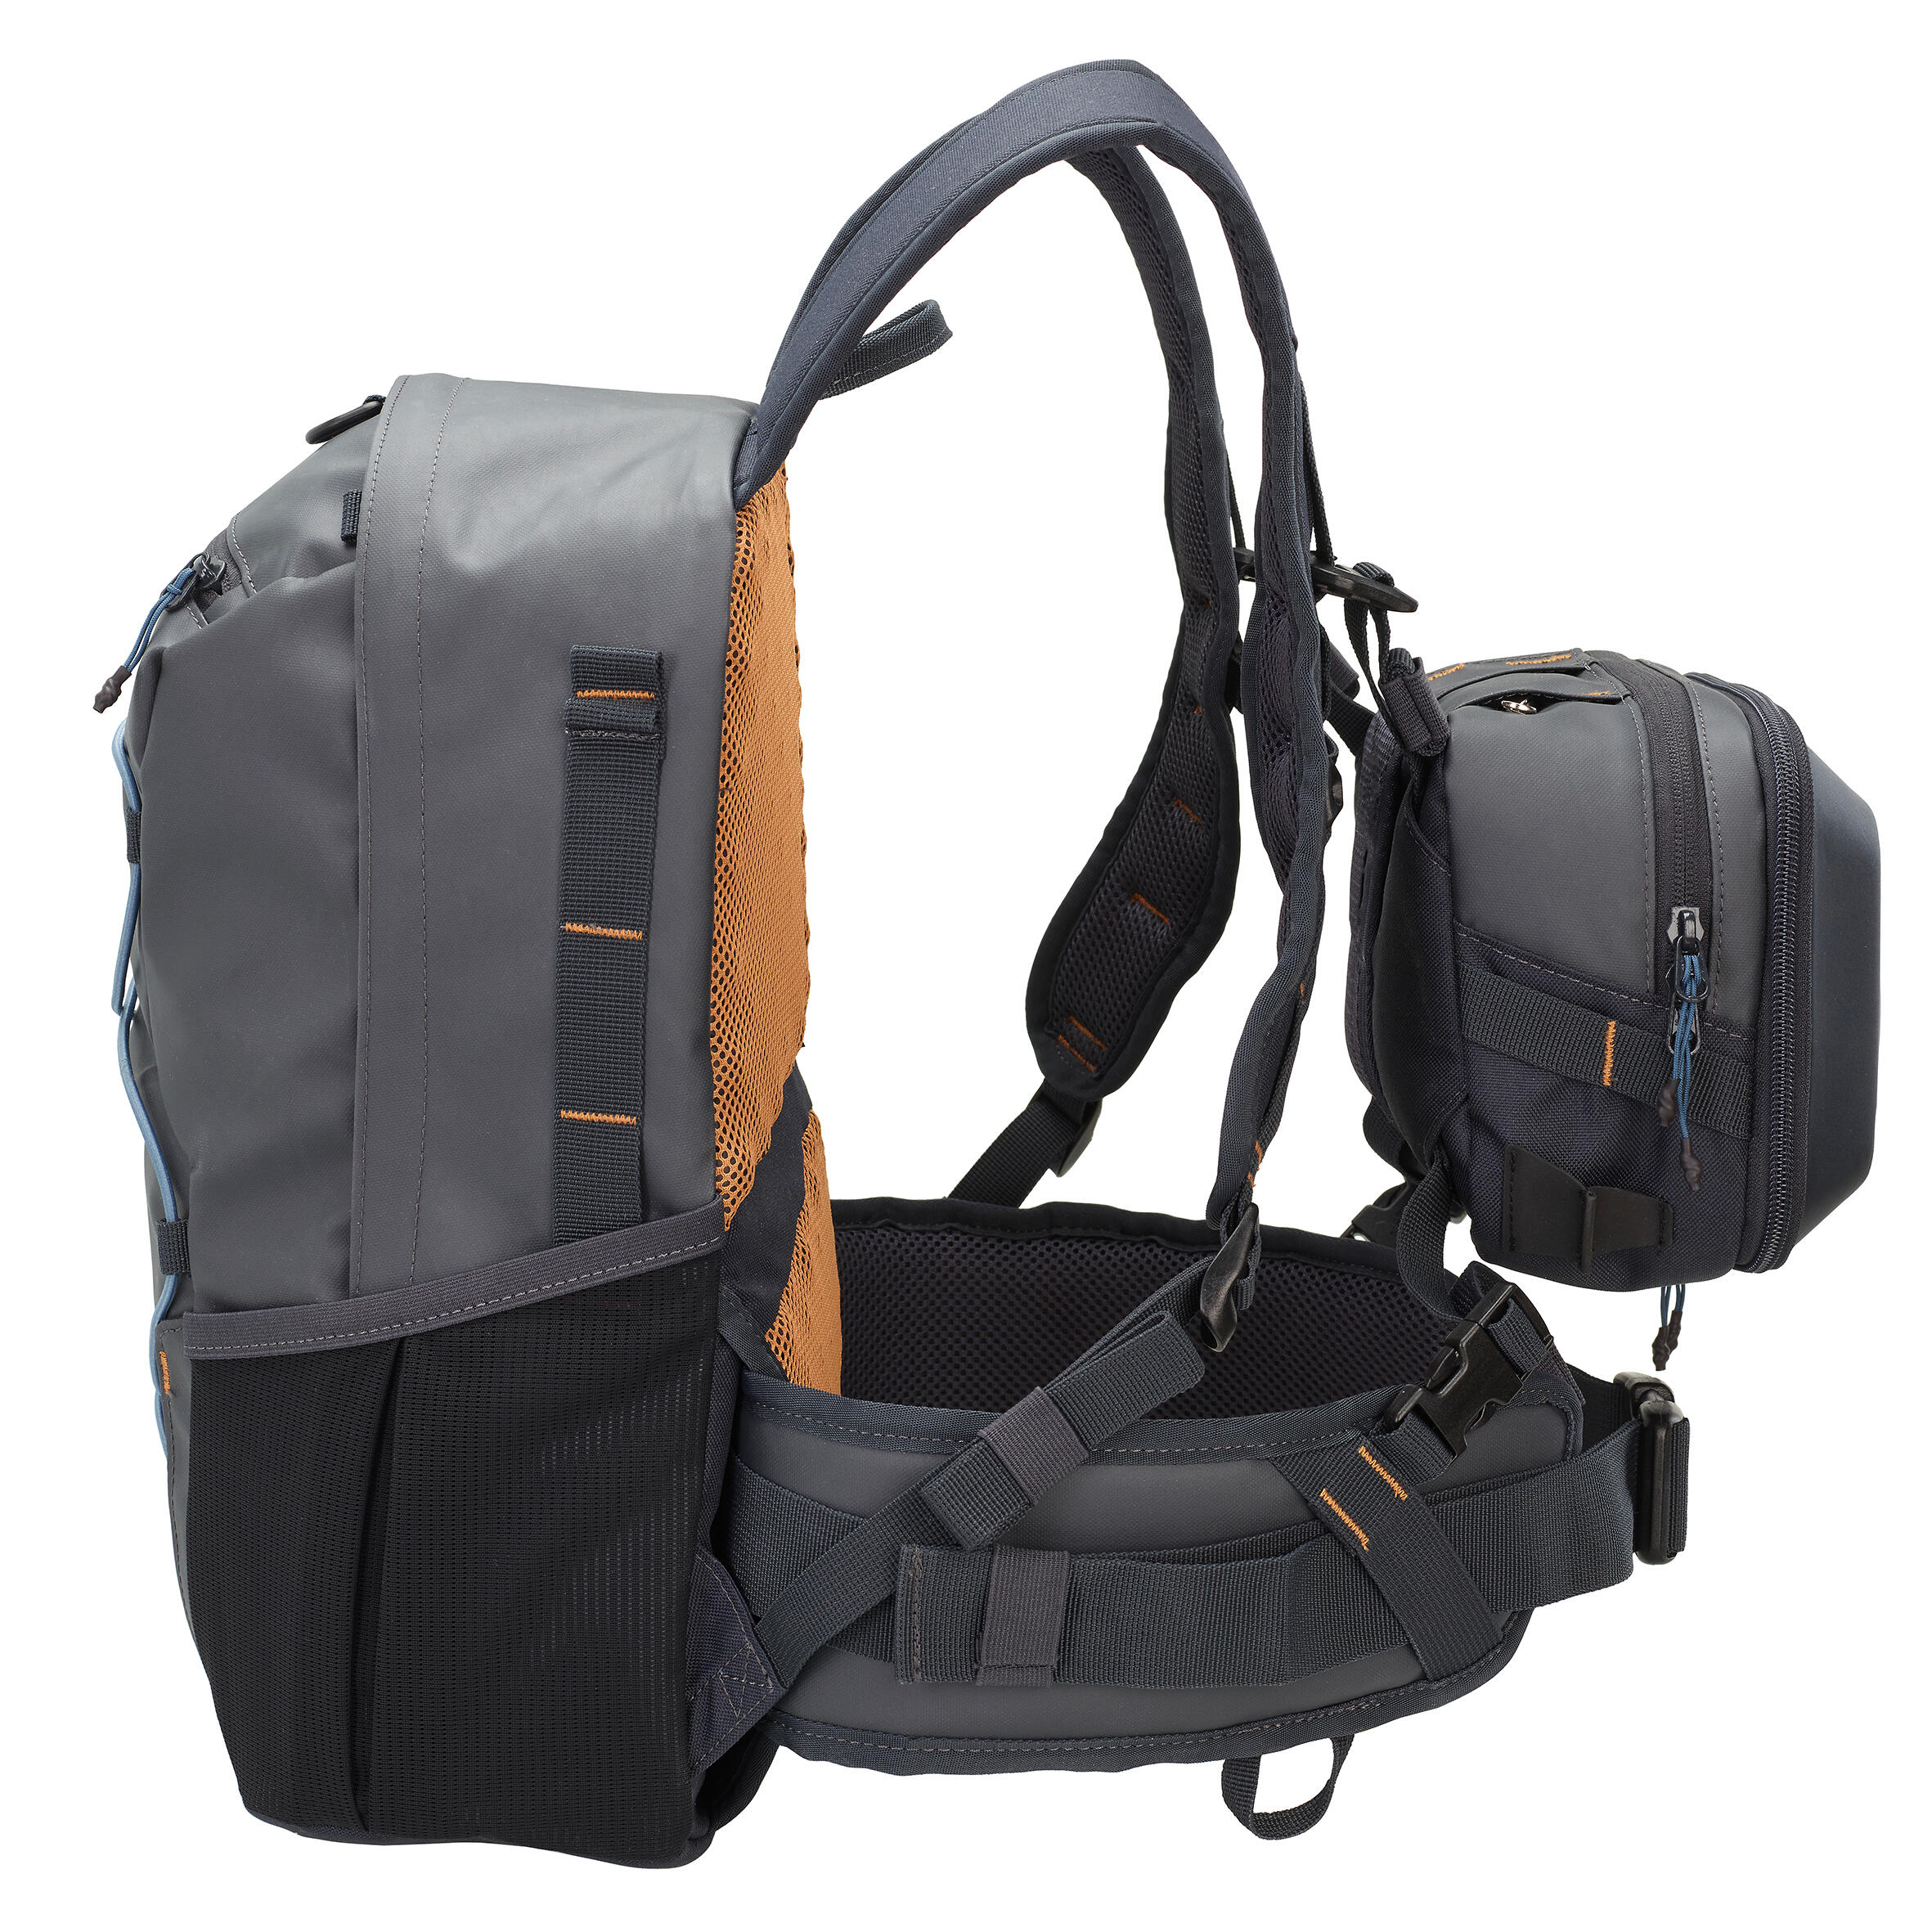 500 fishing backpack and chest pack